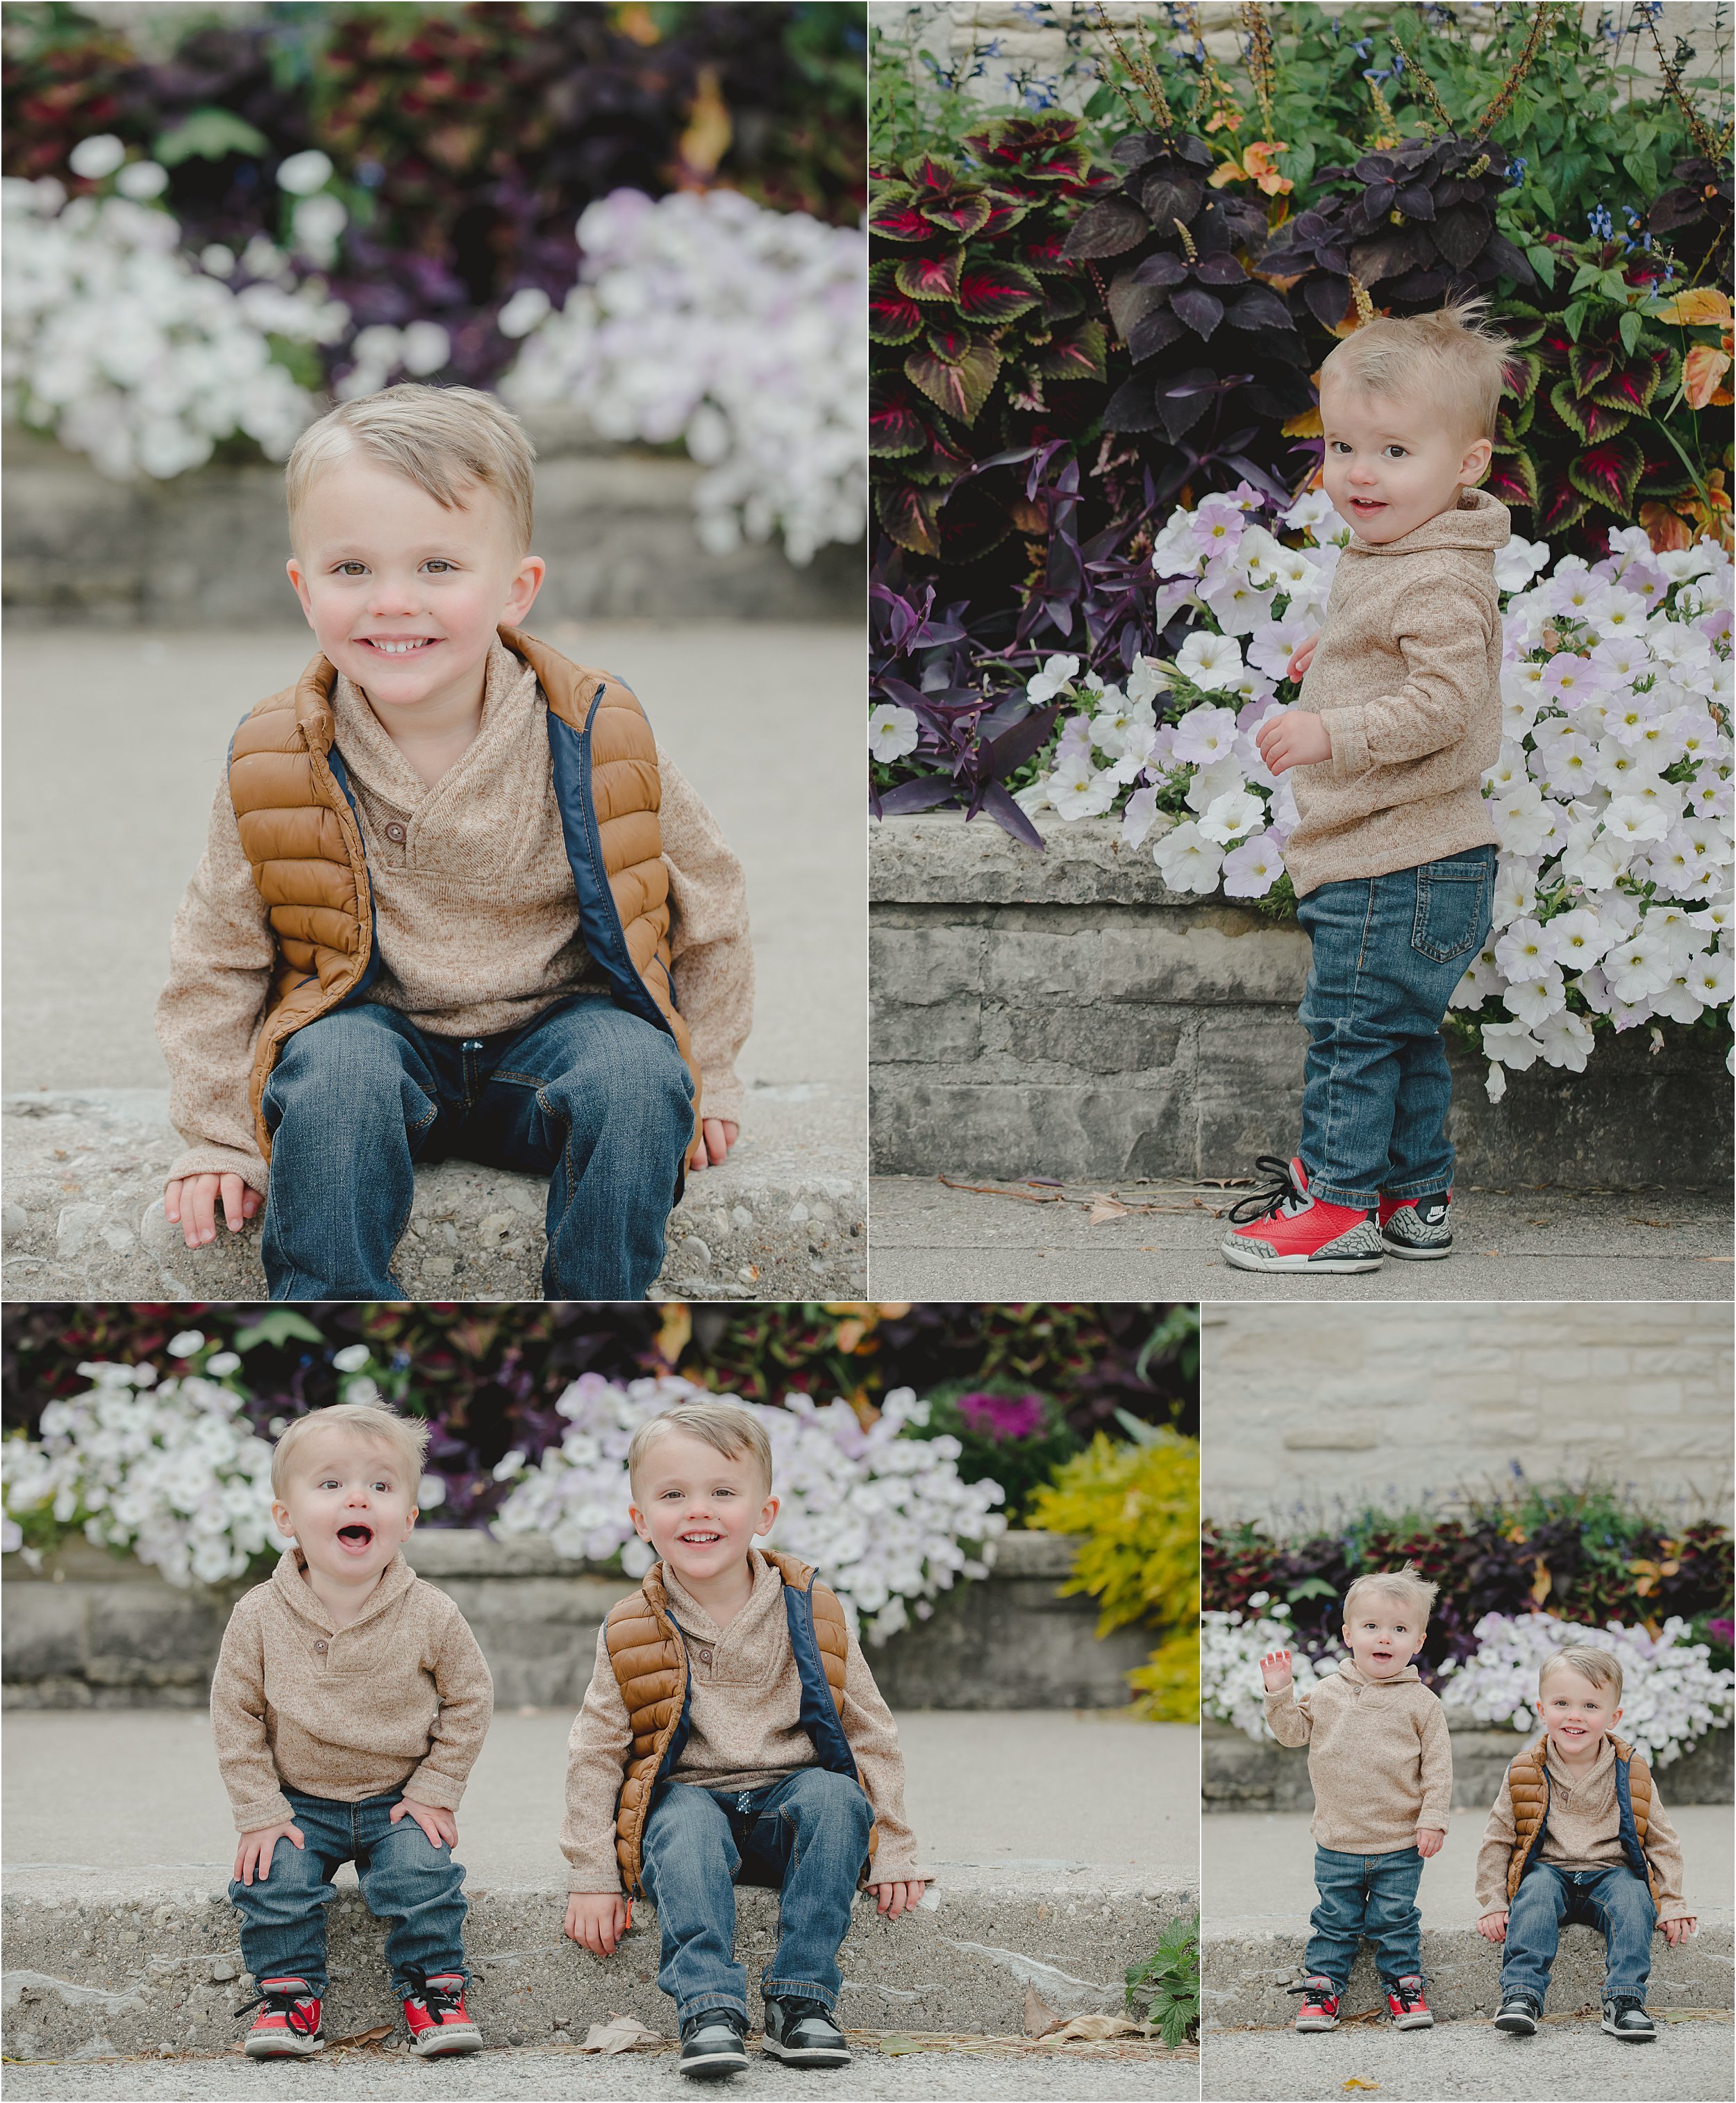 04-brothers-flowers-gold-vest-tan-sweater.JPG